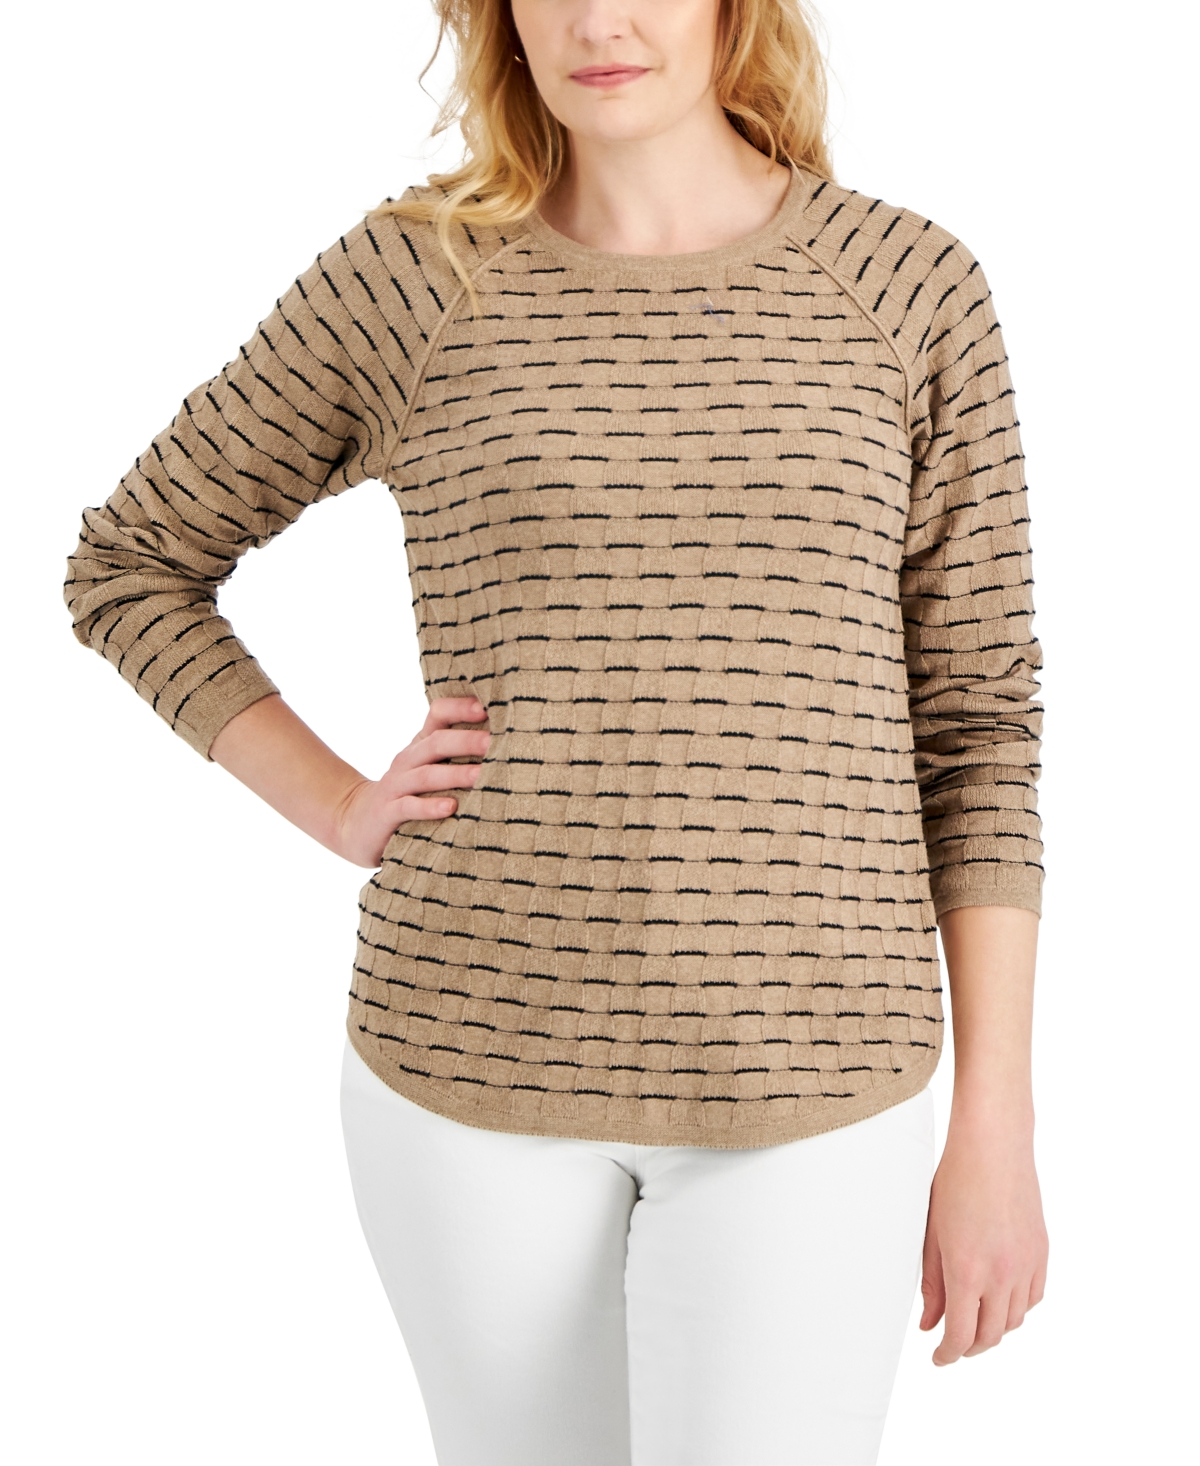 Women's Cotton Tuck-Stitch Sweater, Created for Macy's - Chestnut Heather